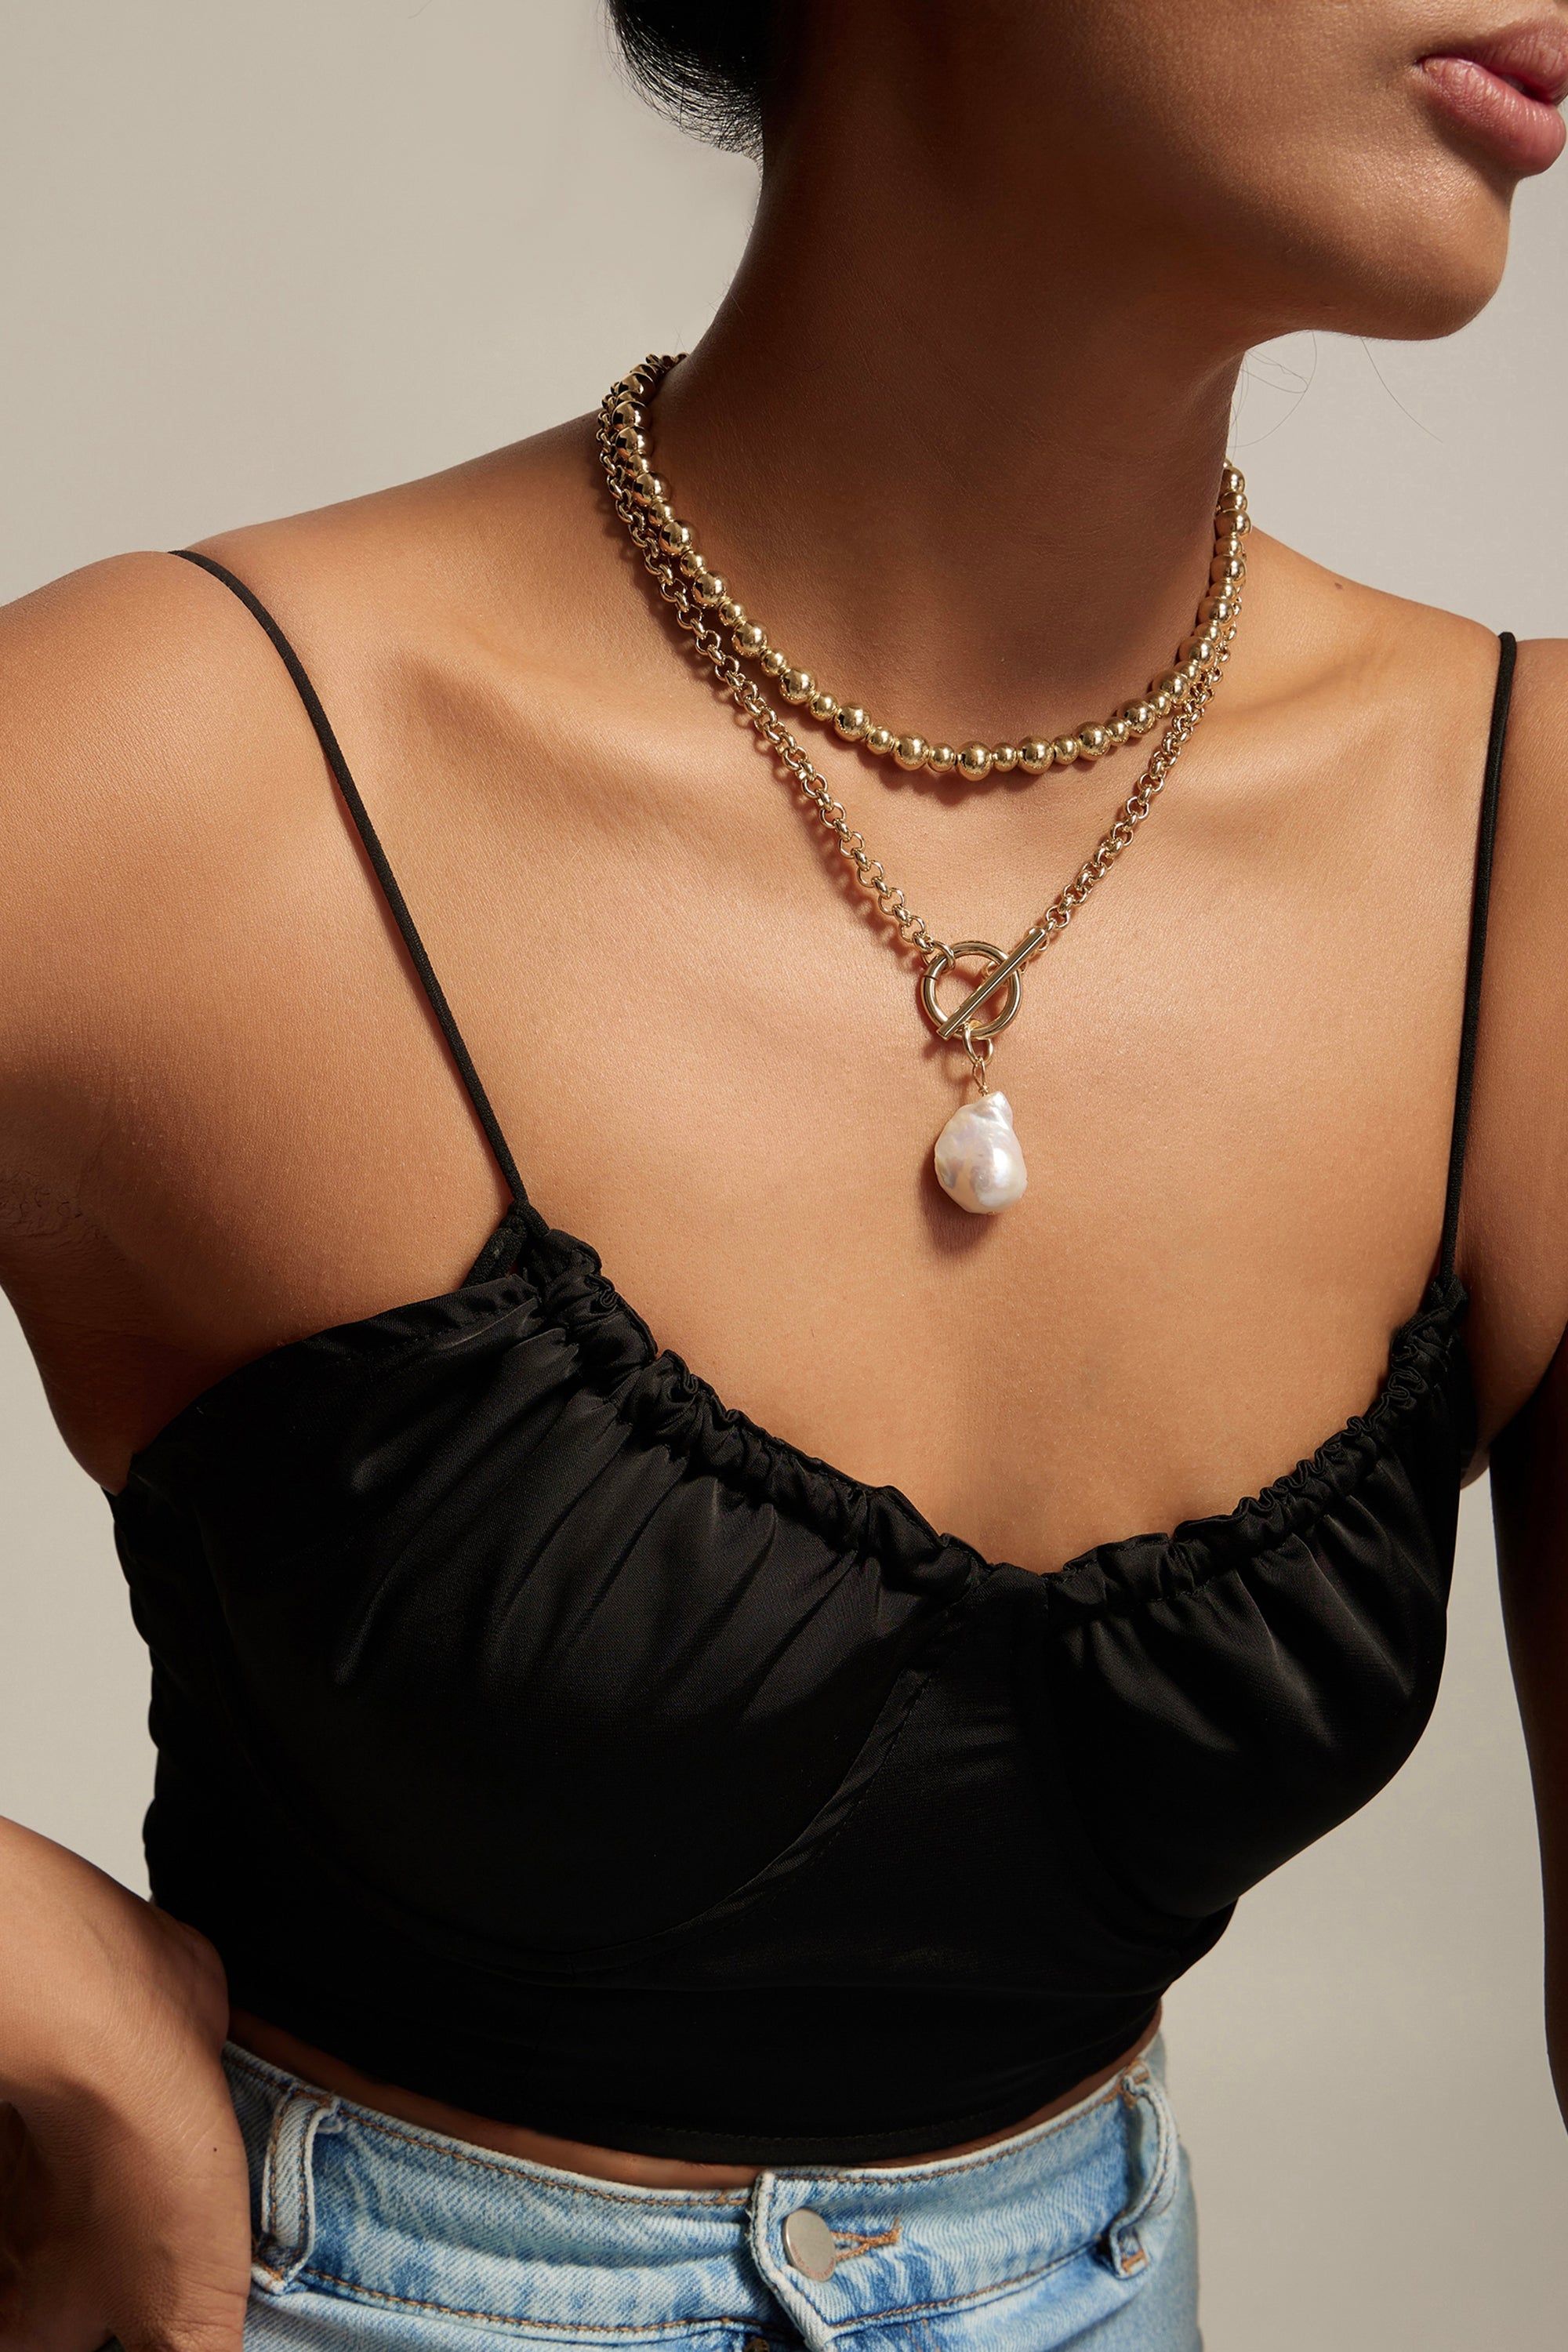 a woman wearing a black top and a pearl necklace